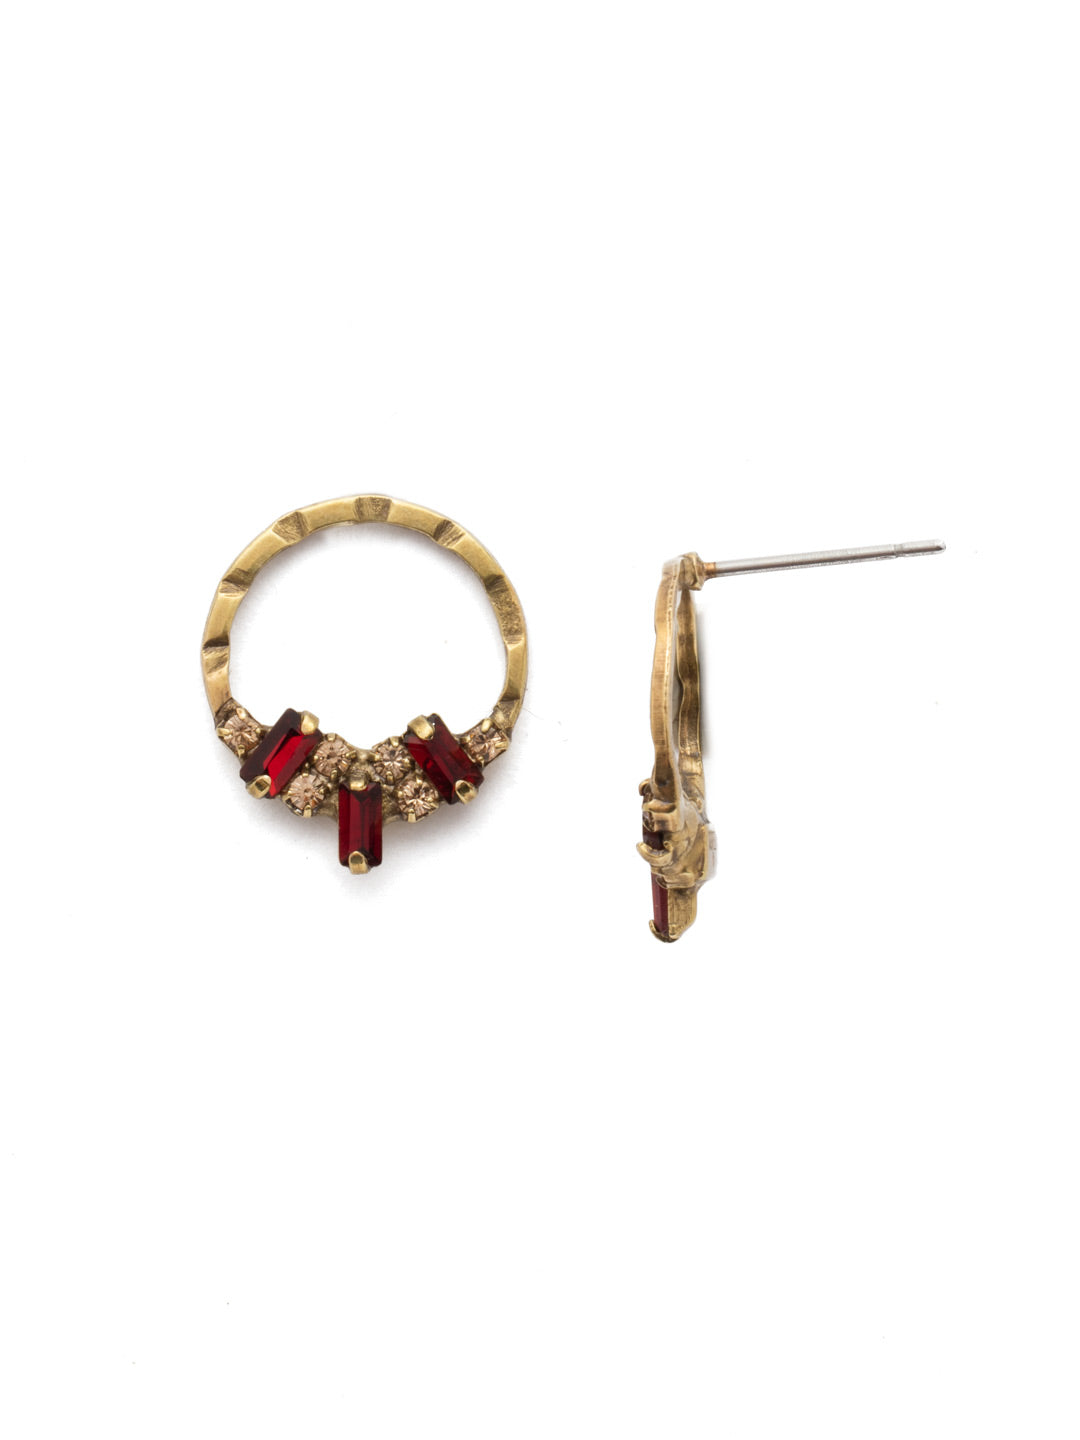 Mini Haute Hammered Stud Earrings - EDL28AGMMA - A hammered circular post earring encrusted with brilliant baguette crystals makes even an everyday look feel special. From Sorrelli's Mighty Maroon collection in our Antique Gold-tone finish.